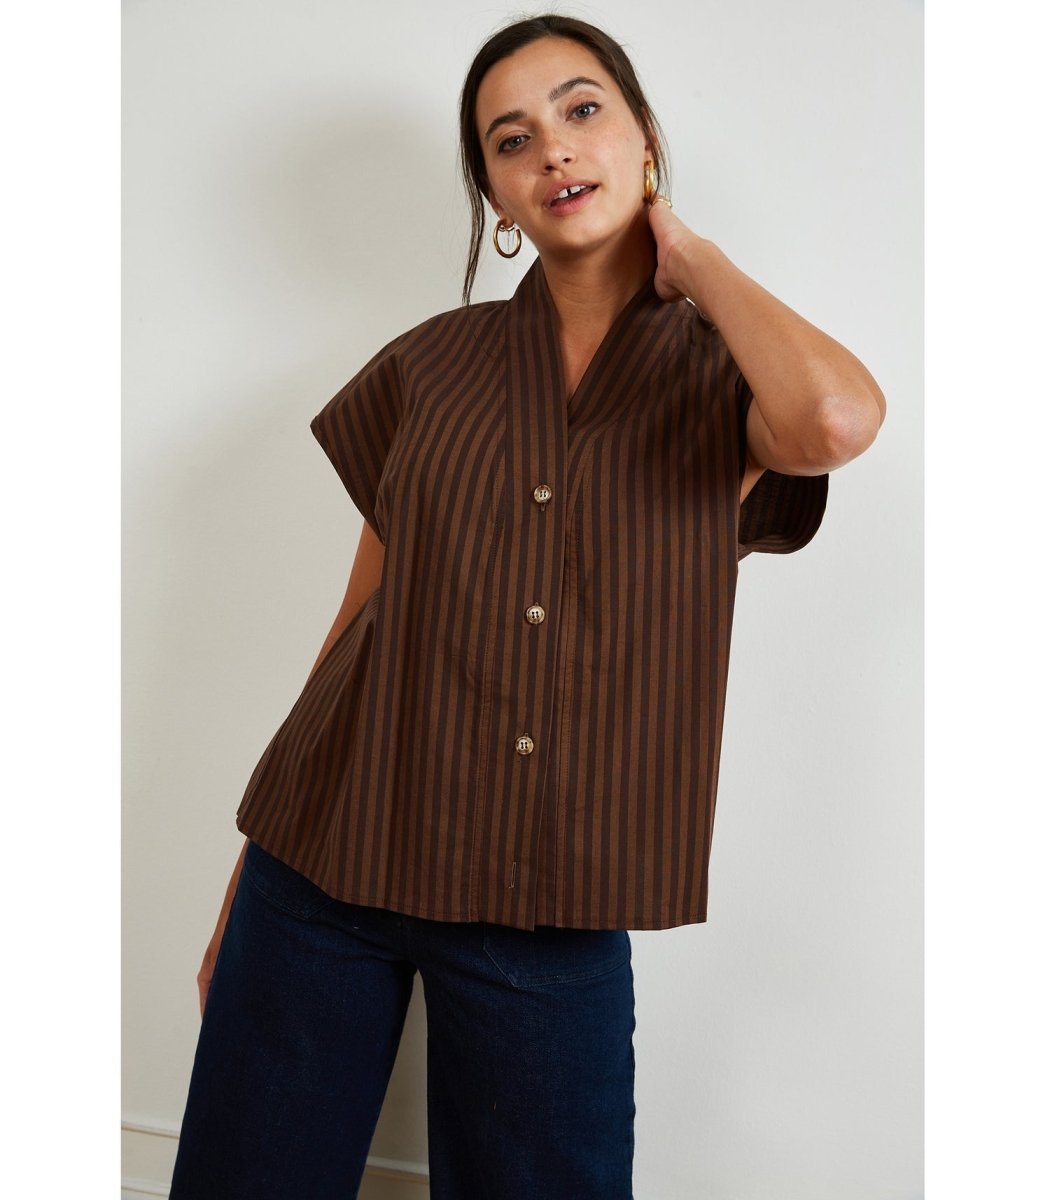 A short sleeve tunic button up in brown stripes. Model has shirt untucked. The Sienna Top in brown Stripe is designed by Loup and made in New York City.